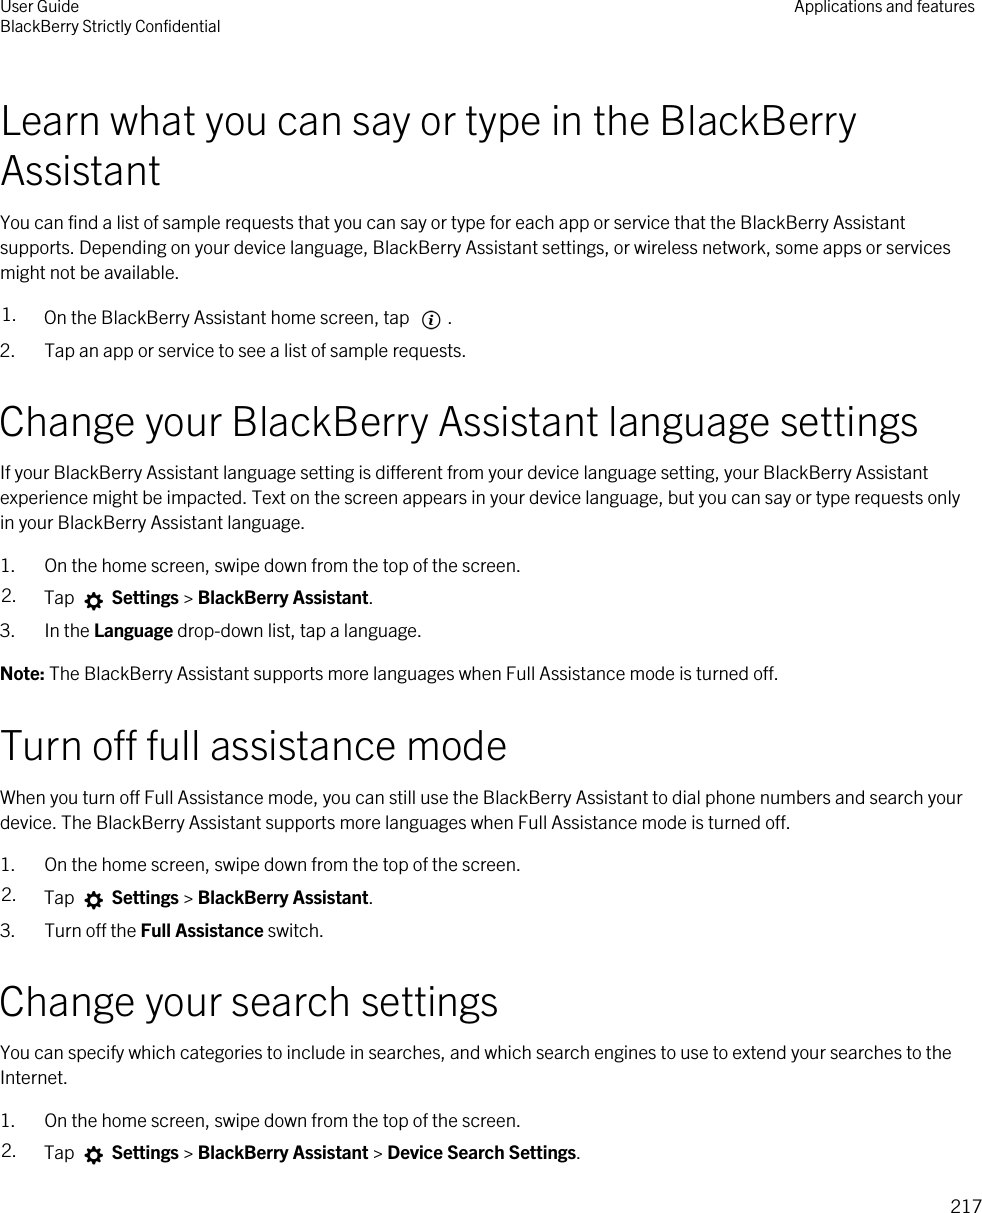 Learn what you can say or type in the BlackBerry AssistantYou can find a list of sample requests that you can say or type for each app or service that the BlackBerry Assistant supports. Depending on your device language, BlackBerry Assistant settings, or wireless network, some apps or services might not be available.1. On the BlackBerry Assistant home screen, tap  . 2. Tap an app or service to see a list of sample requests.Change your BlackBerry Assistant language settingsIf your BlackBerry Assistant language setting is different from your device language setting, your BlackBerry Assistant experience might be impacted. Text on the screen appears in your device language, but you can say or type requests only in your BlackBerry Assistant language.1. On the home screen, swipe down from the top of the screen.2. Tap   Settings &gt; BlackBerry Assistant.3. In the Language drop-down list, tap a language.Note: The BlackBerry Assistant supports more languages when Full Assistance mode is turned off.Turn off full assistance modeWhen you turn off Full Assistance mode, you can still use the BlackBerry Assistant to dial phone numbers and search your device. The BlackBerry Assistant supports more languages when Full Assistance mode is turned off.1. On the home screen, swipe down from the top of the screen.2. Tap   Settings &gt; BlackBerry Assistant.3. Turn off the Full Assistance switch.Change your search settingsYou can specify which categories to include in searches, and which search engines to use to extend your searches to the Internet.1. On the home screen, swipe down from the top of the screen.2. Tap   Settings &gt; BlackBerry Assistant &gt; Device Search Settings.User GuideBlackBerry Strictly Confidential Applications and features217